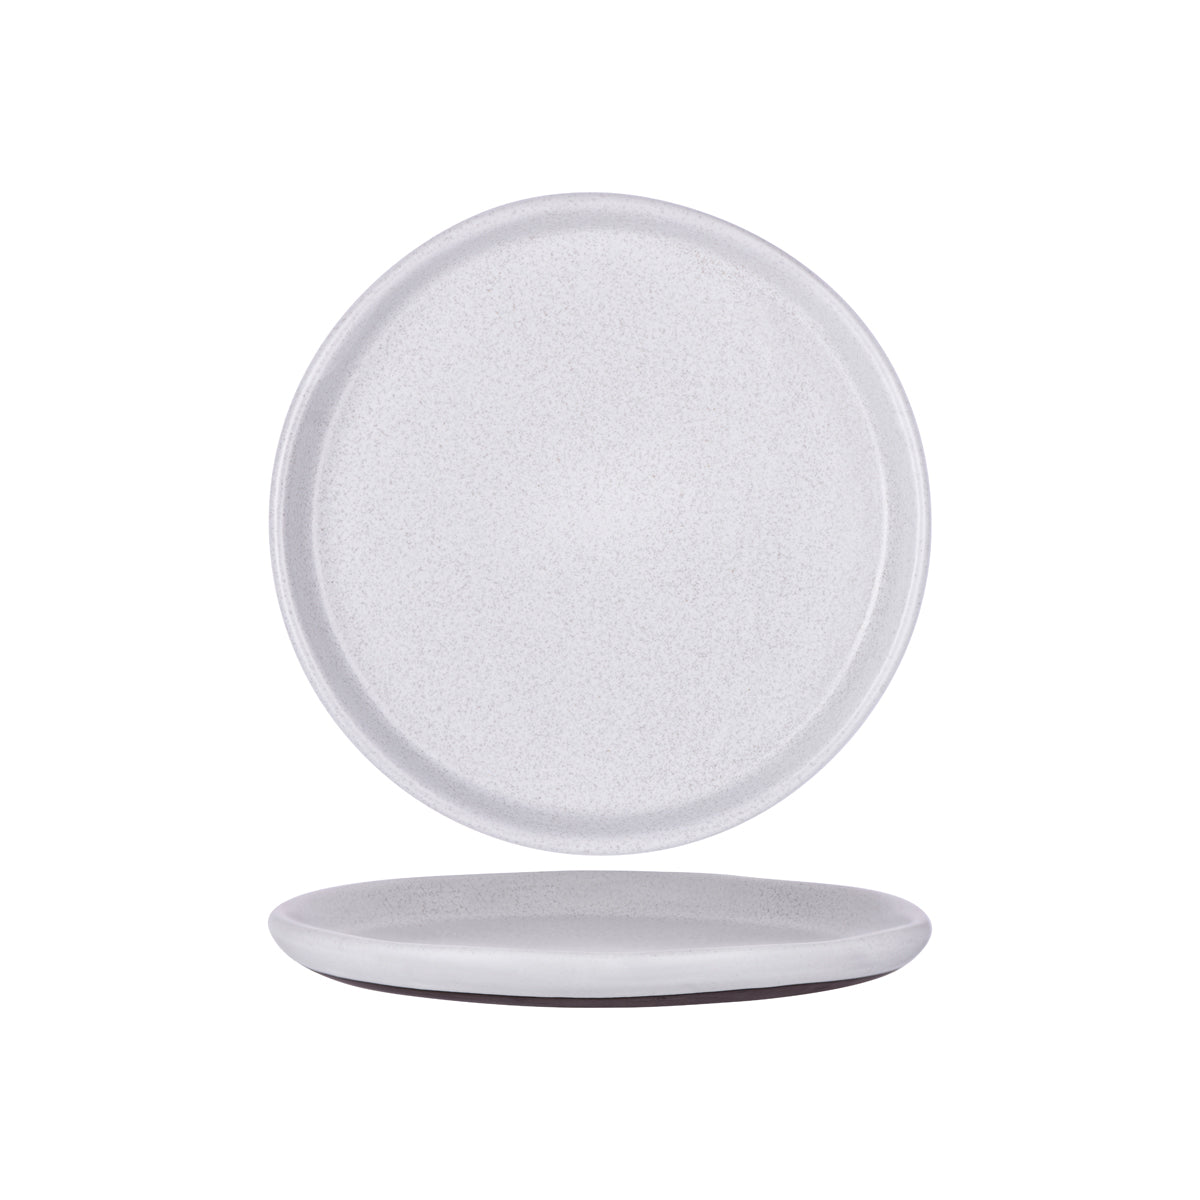 905207 Tablekraft Naturals Ash Grey Round Coupe Plate 325mm Tomkin Australia Hospitality Supplies